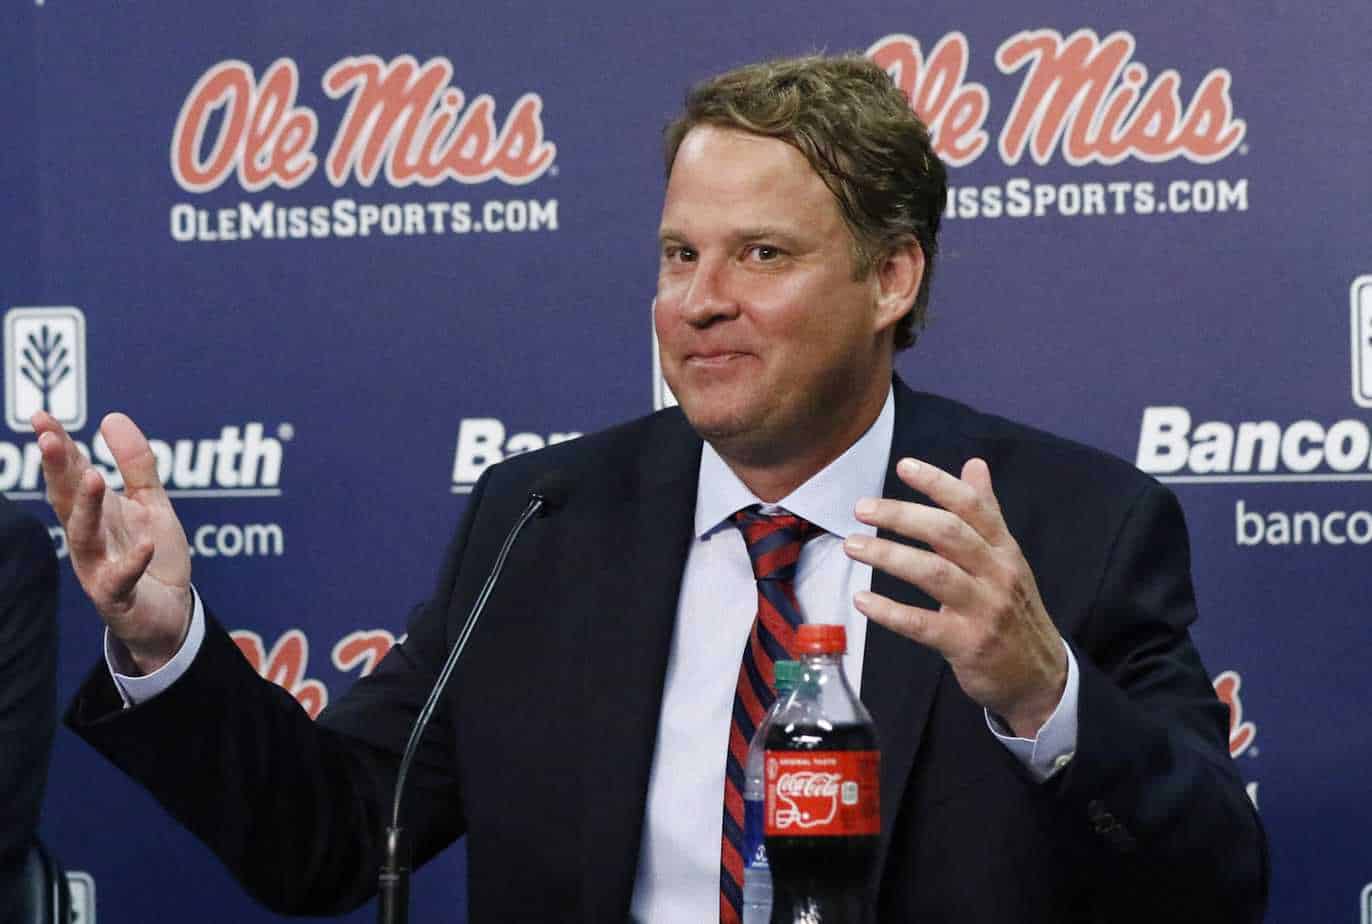 Ole Miss head coach Lane Kiffin took to social media to troll new LSU head coach Brian Kelly over an extremely award video of him dancing with a recruit